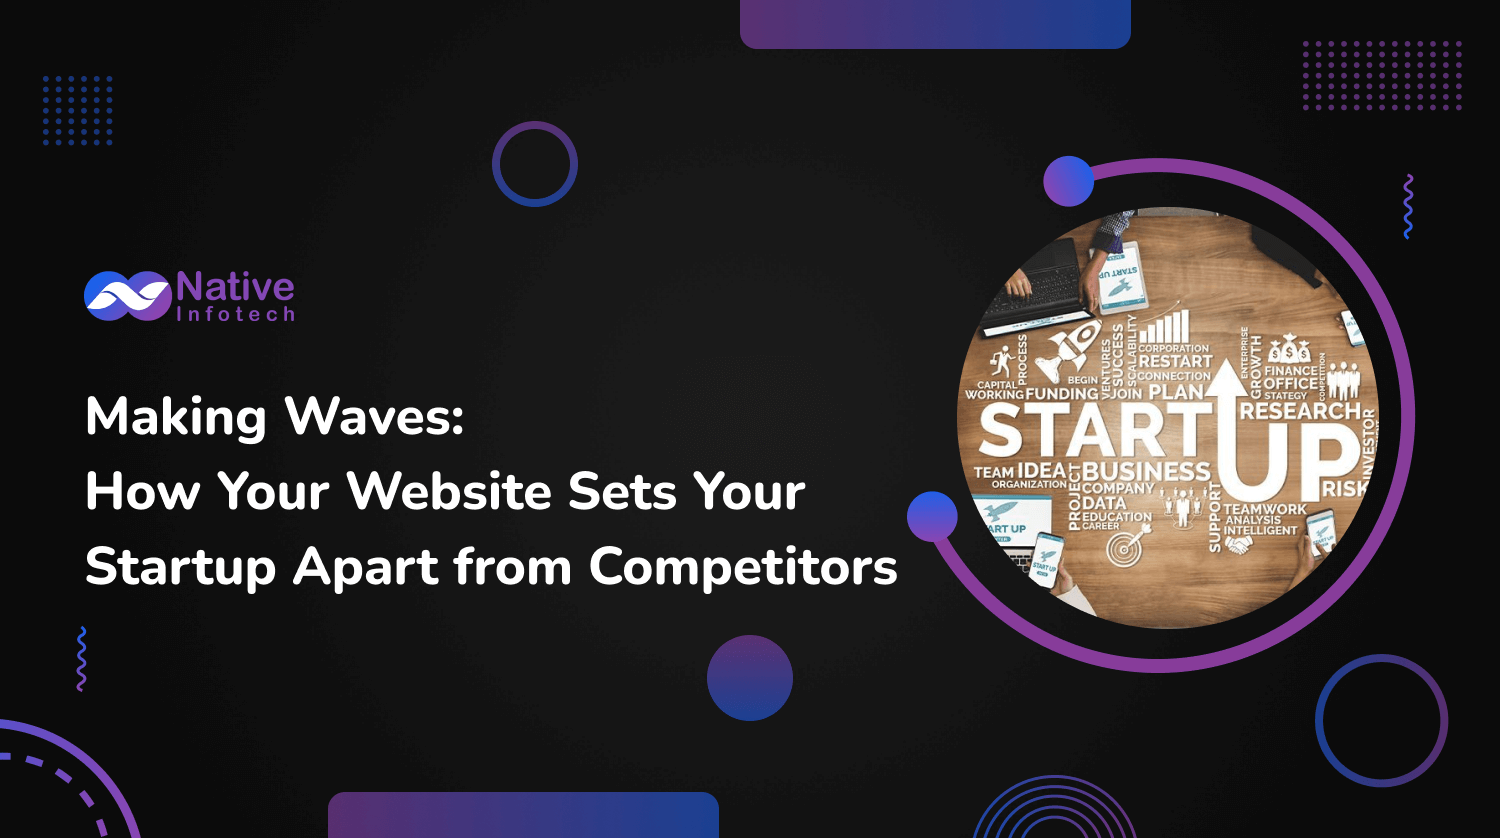 Making Waves: How Your Website Sets Your Startup Apart from Competitors | Native Infotech